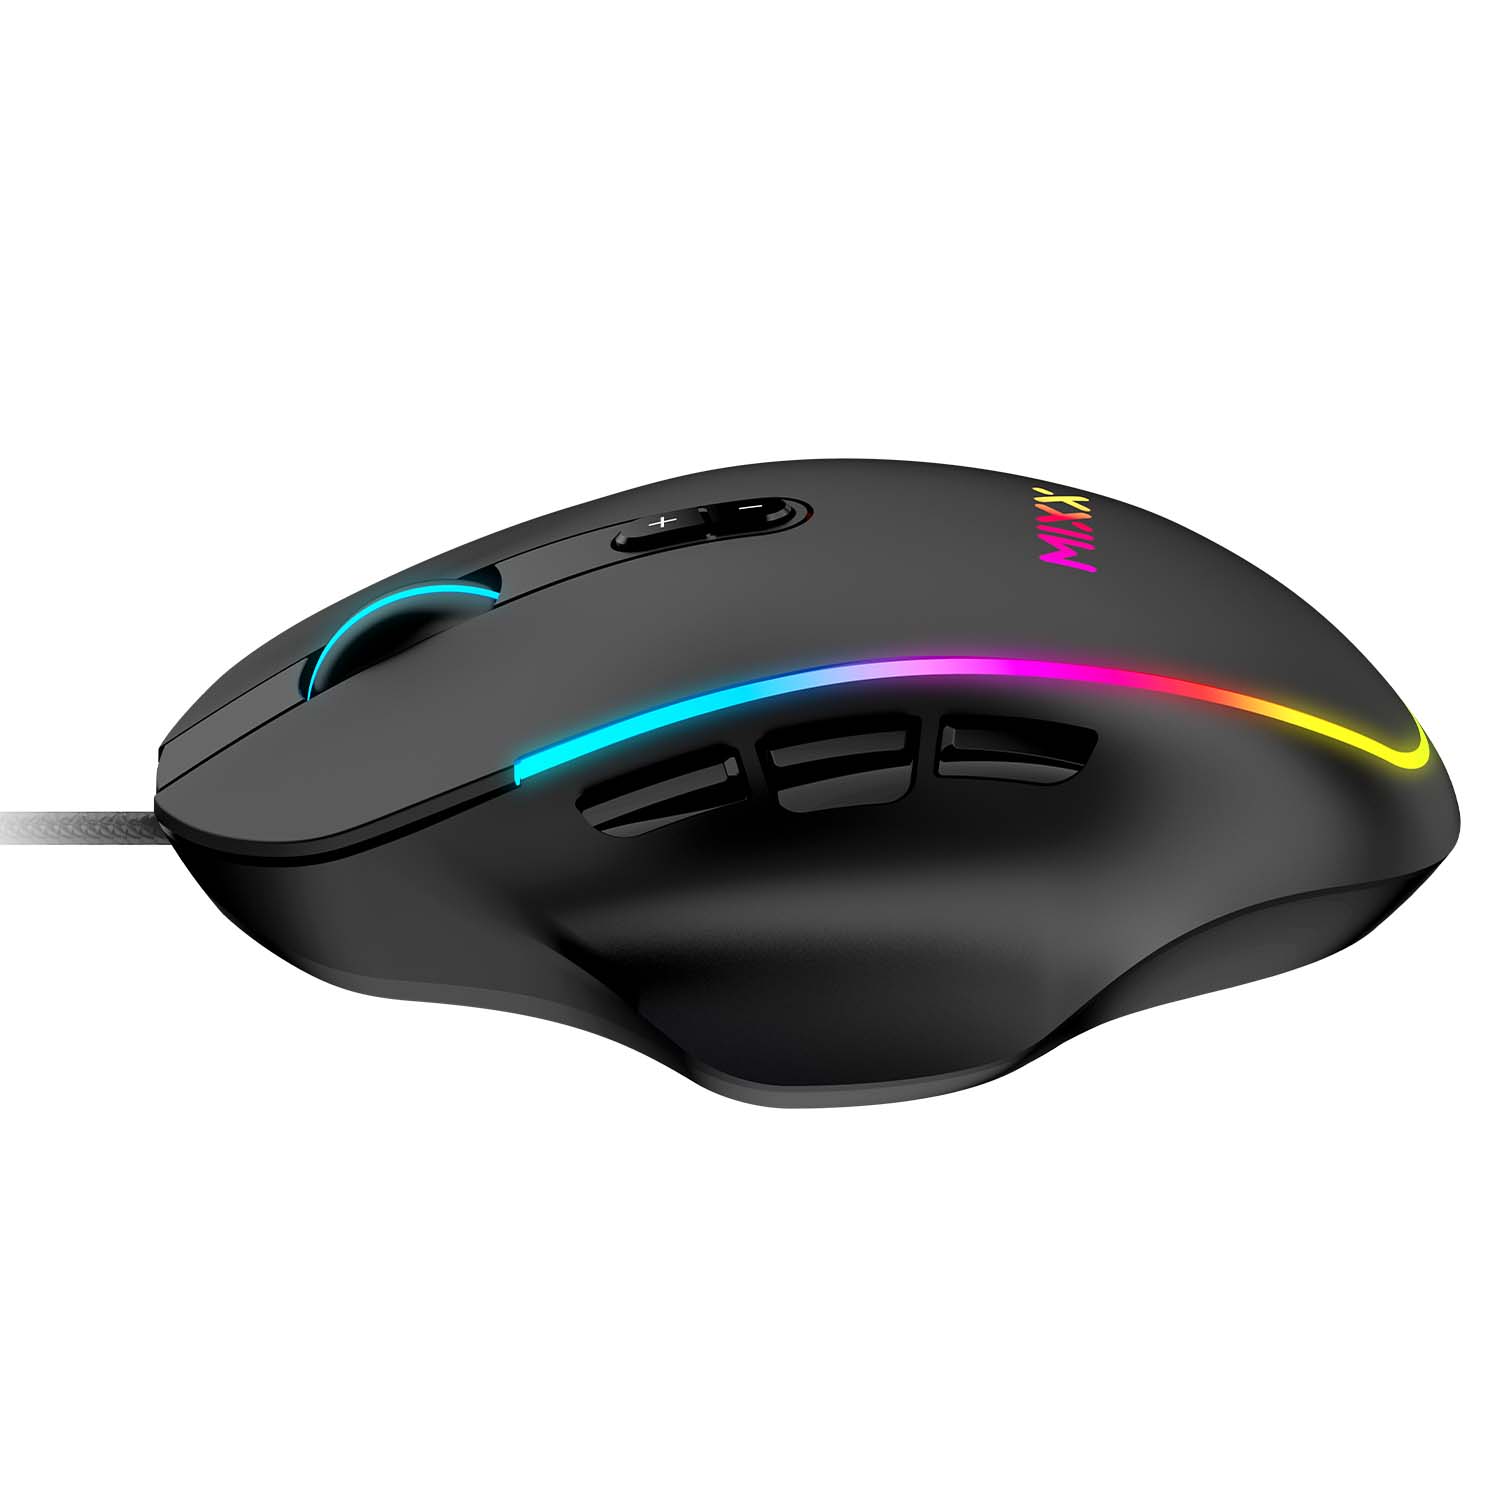 MIXX GAMING RAPIDX POINT WIRED GAMING MOUSE - Mixx Audio